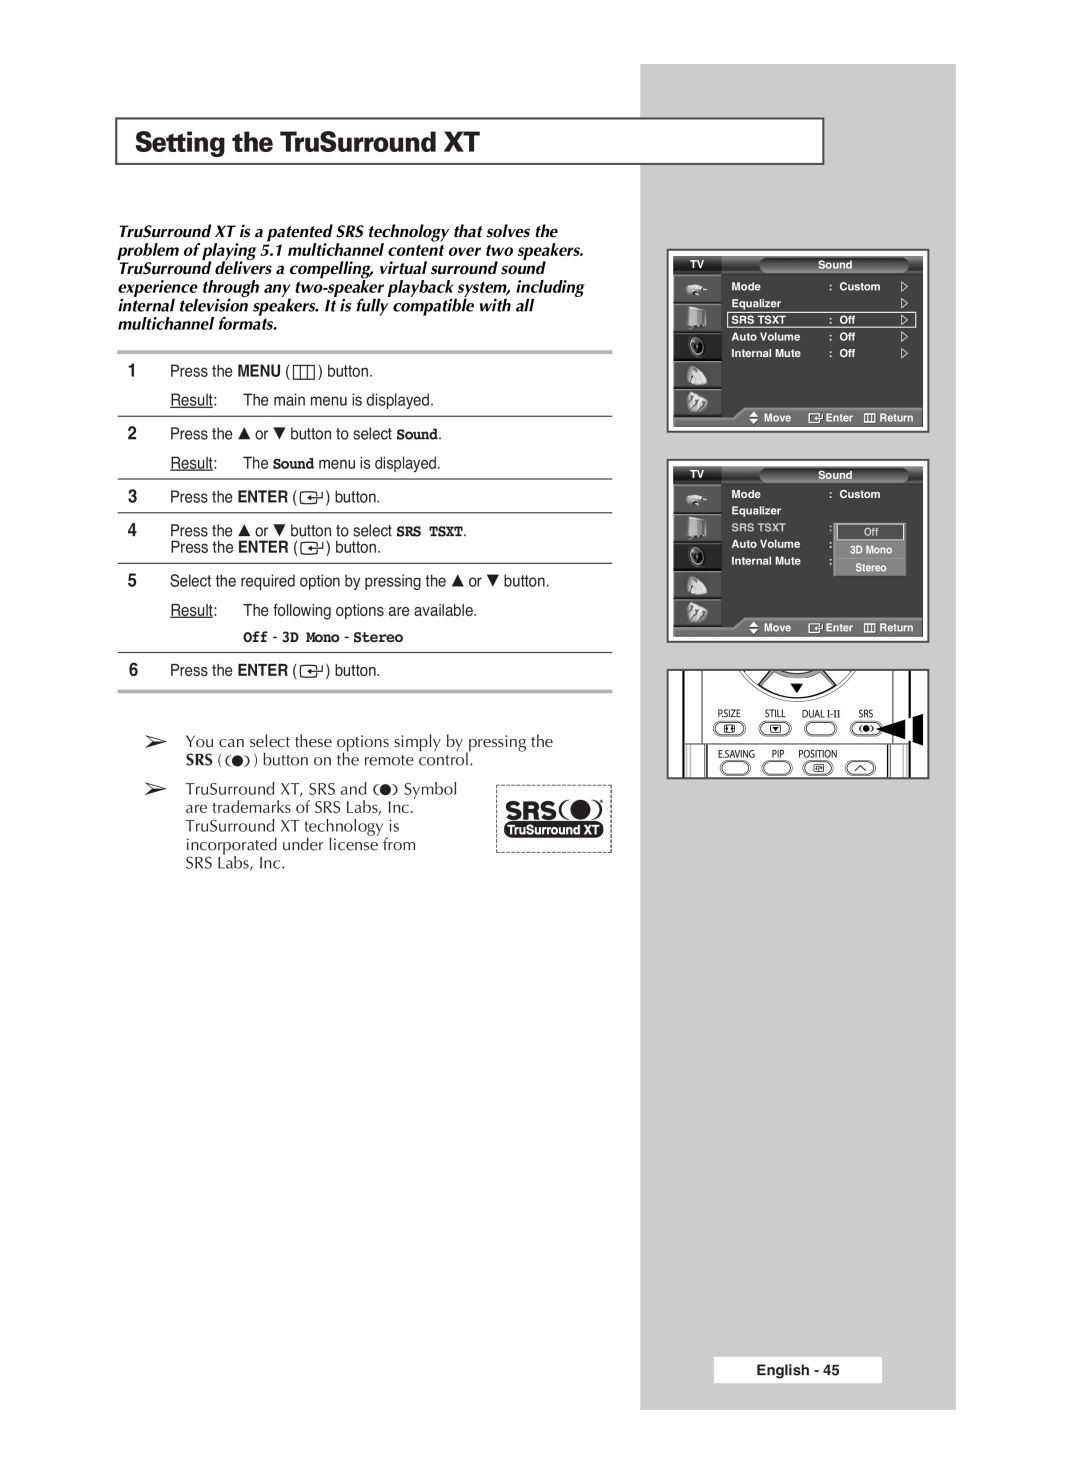 Samsung PS-42S5S manual Setting the TruSurround XT, Off - 3D Mono - Stereo 